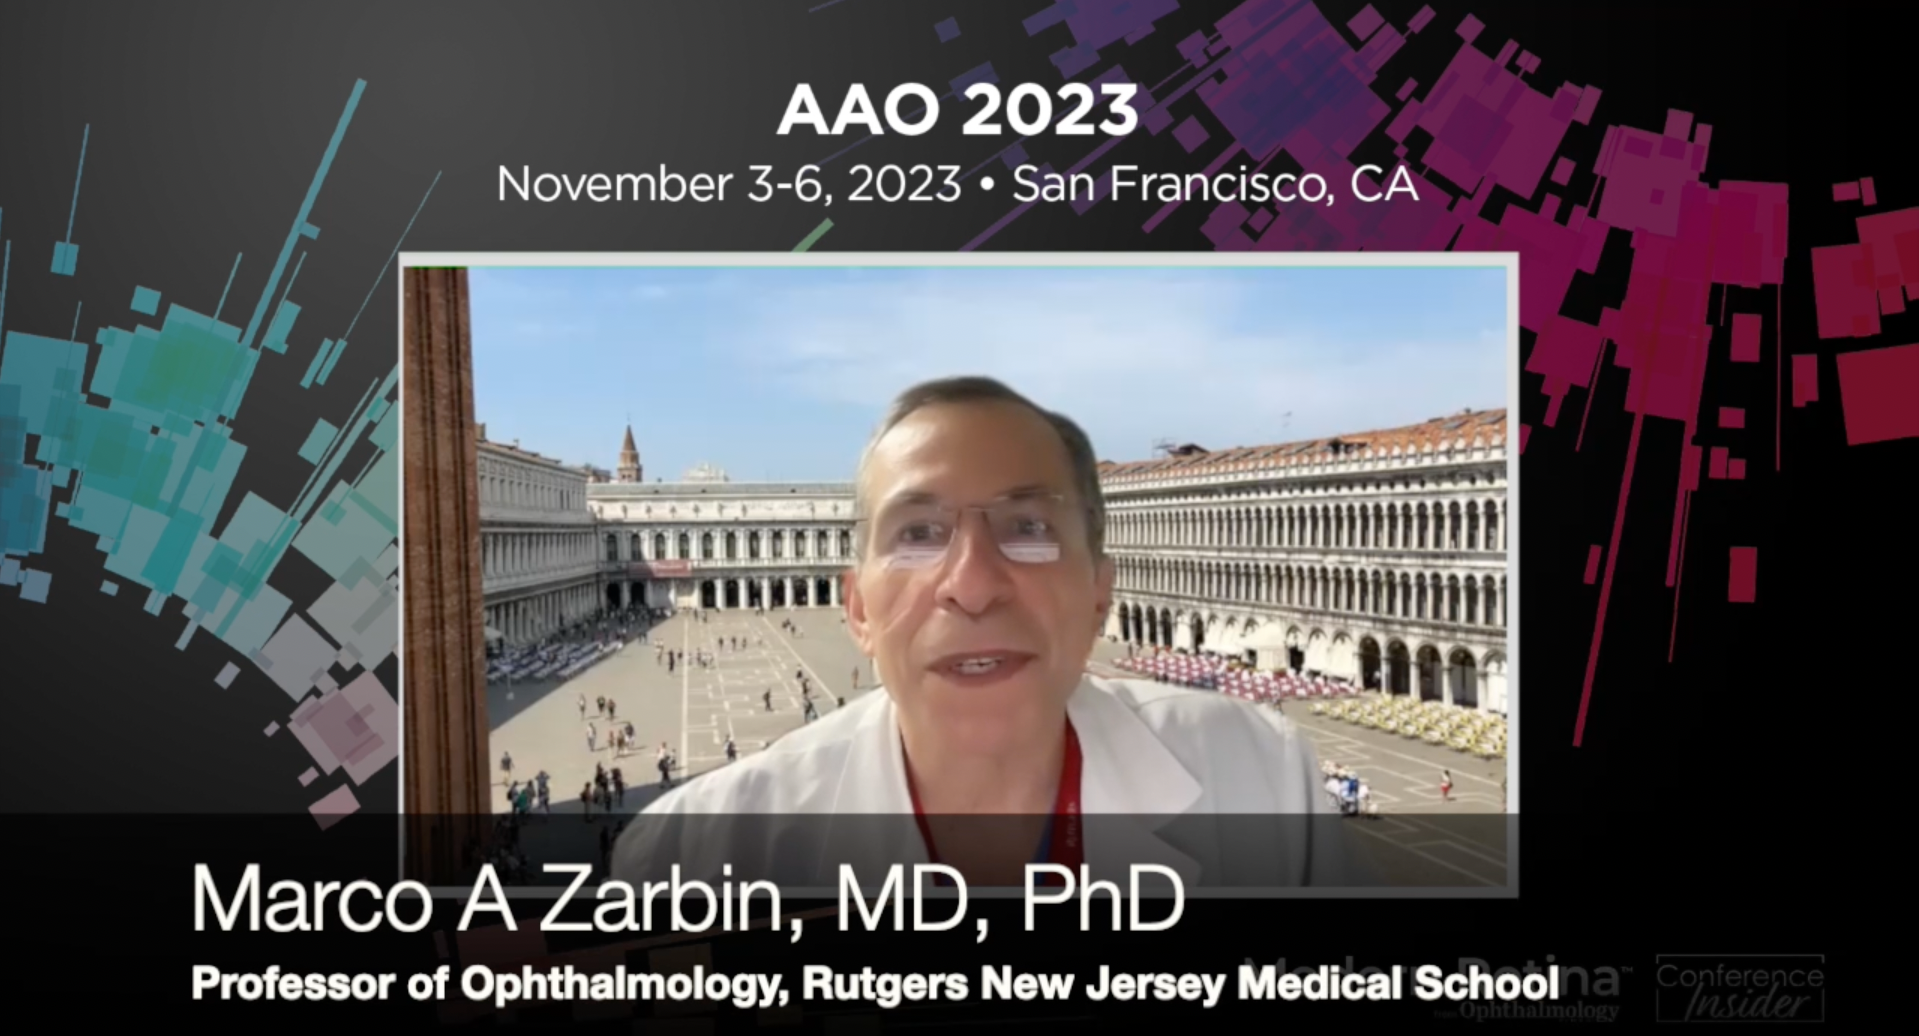 AAO 2023: Post-hoc analysis of the YOSEMITE and RHINE clinical trials